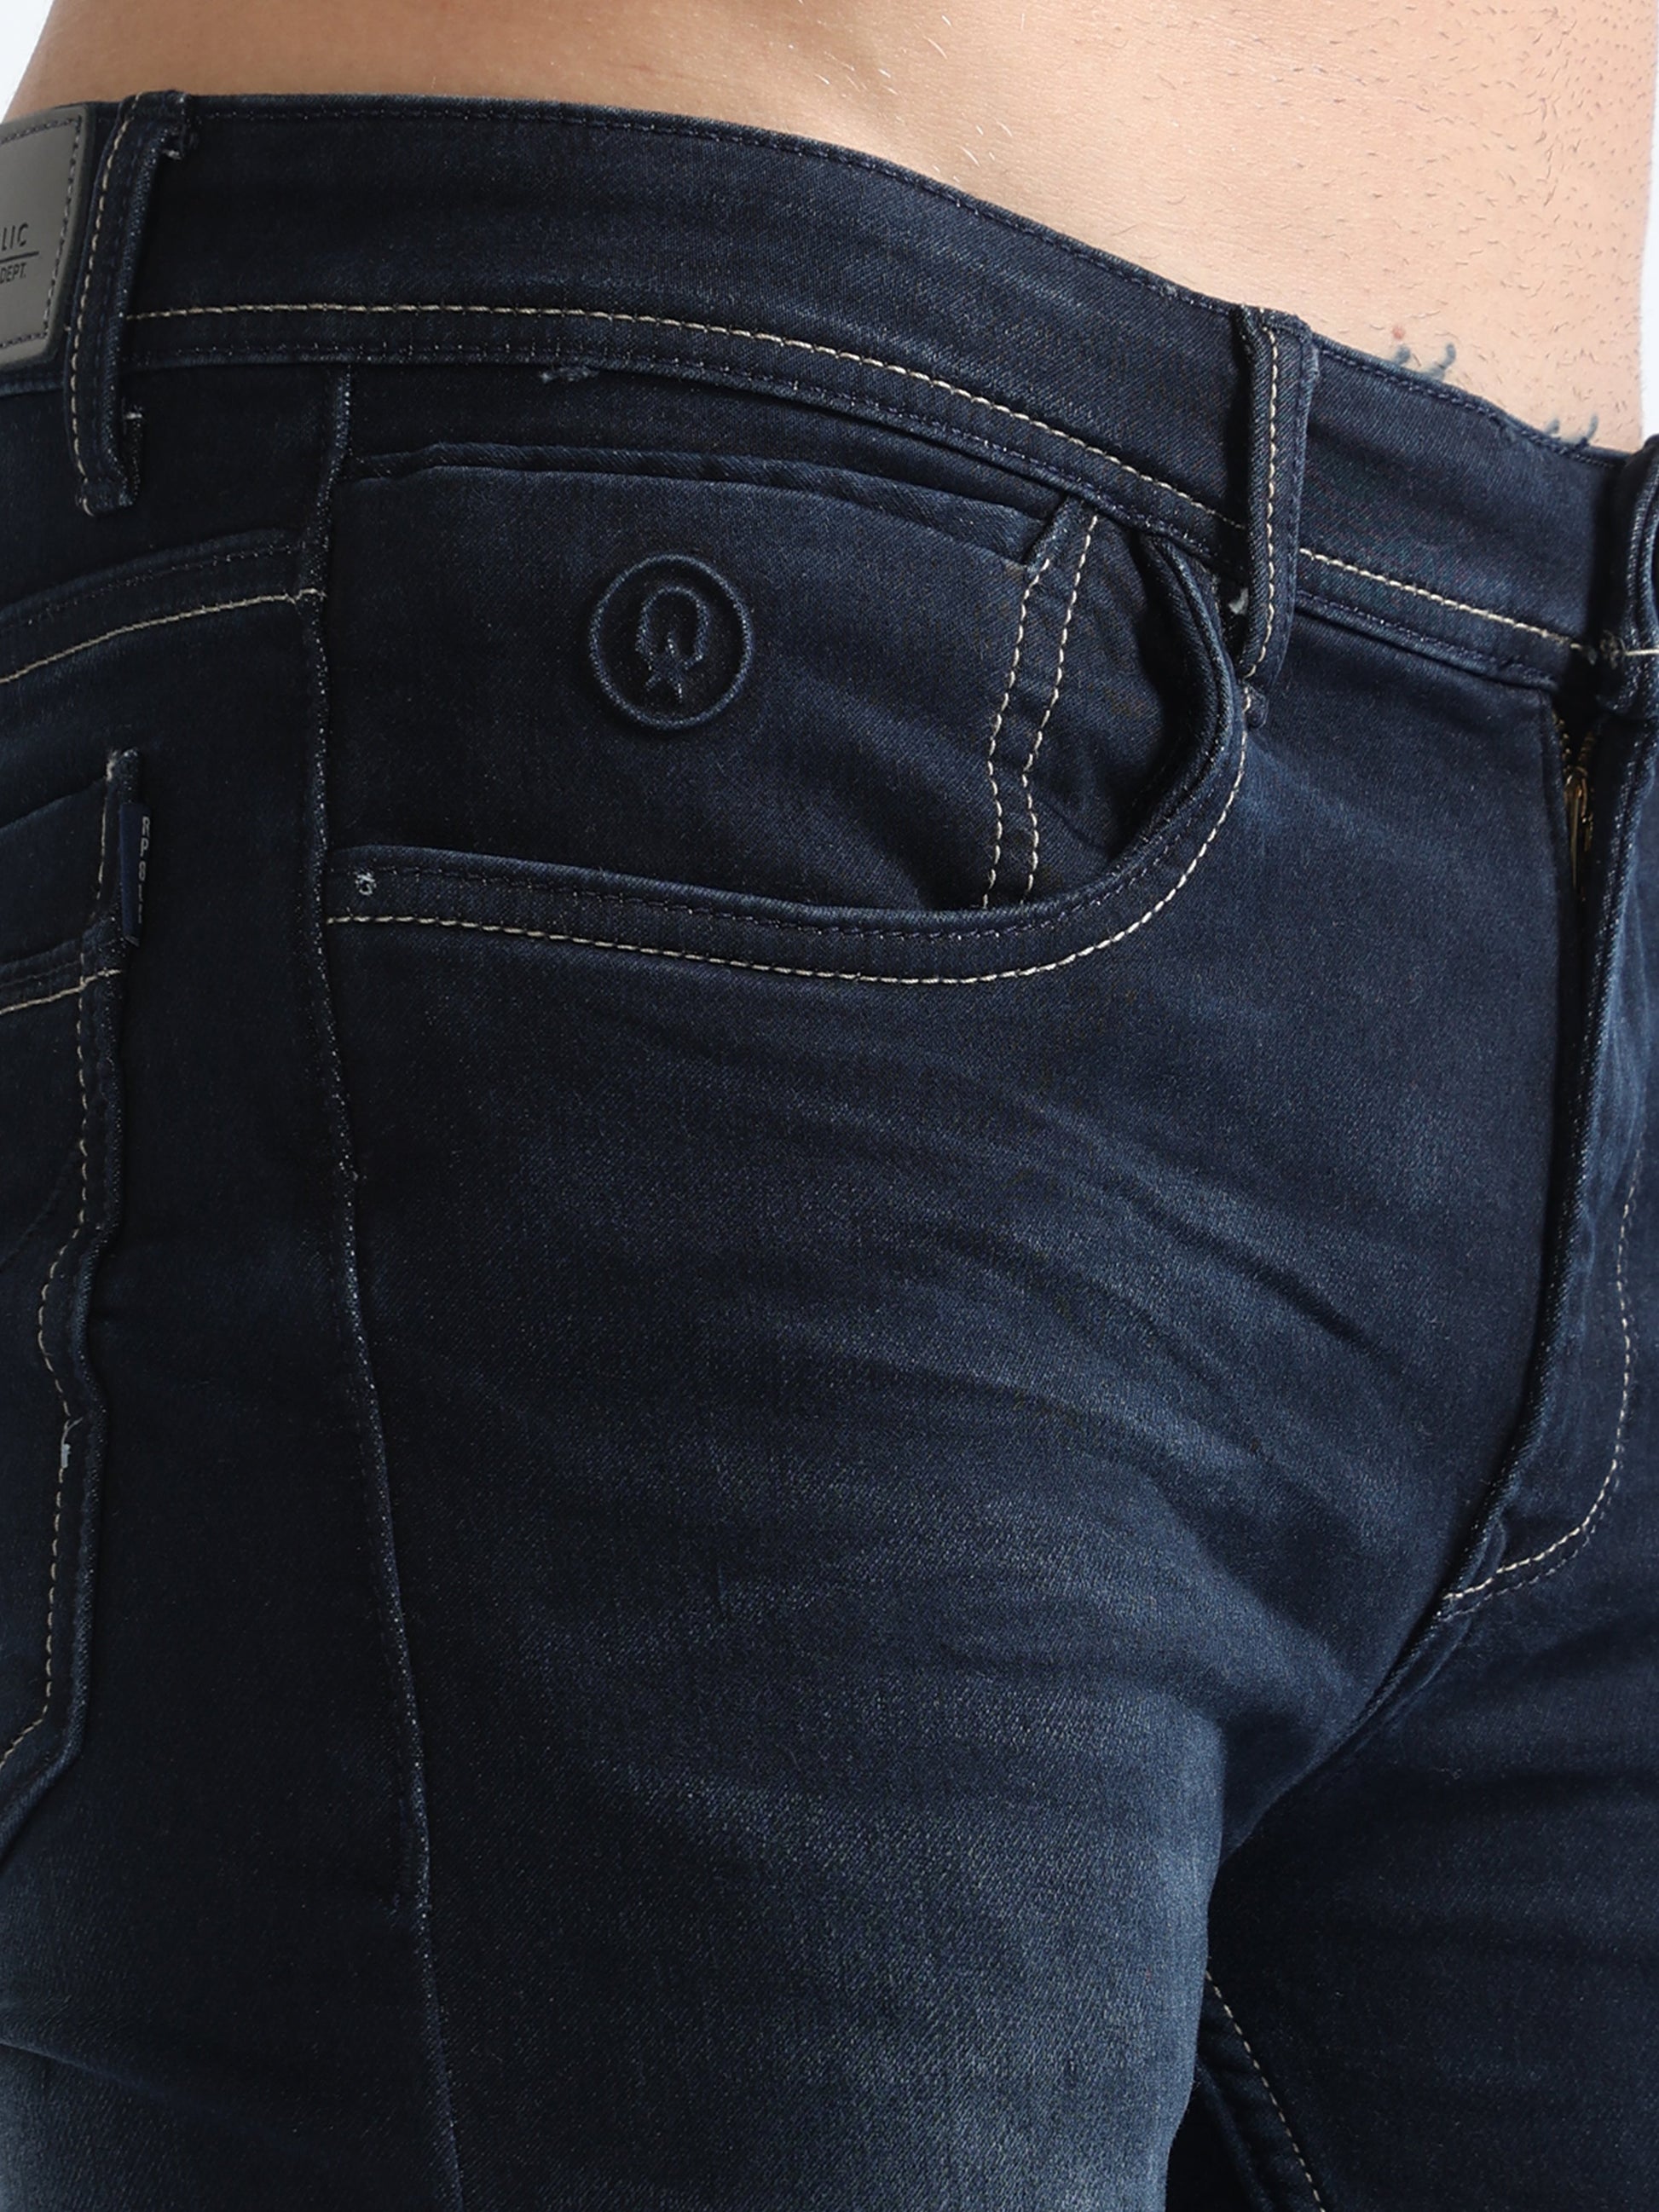 Buy Washed Double Shade Jeans Online.